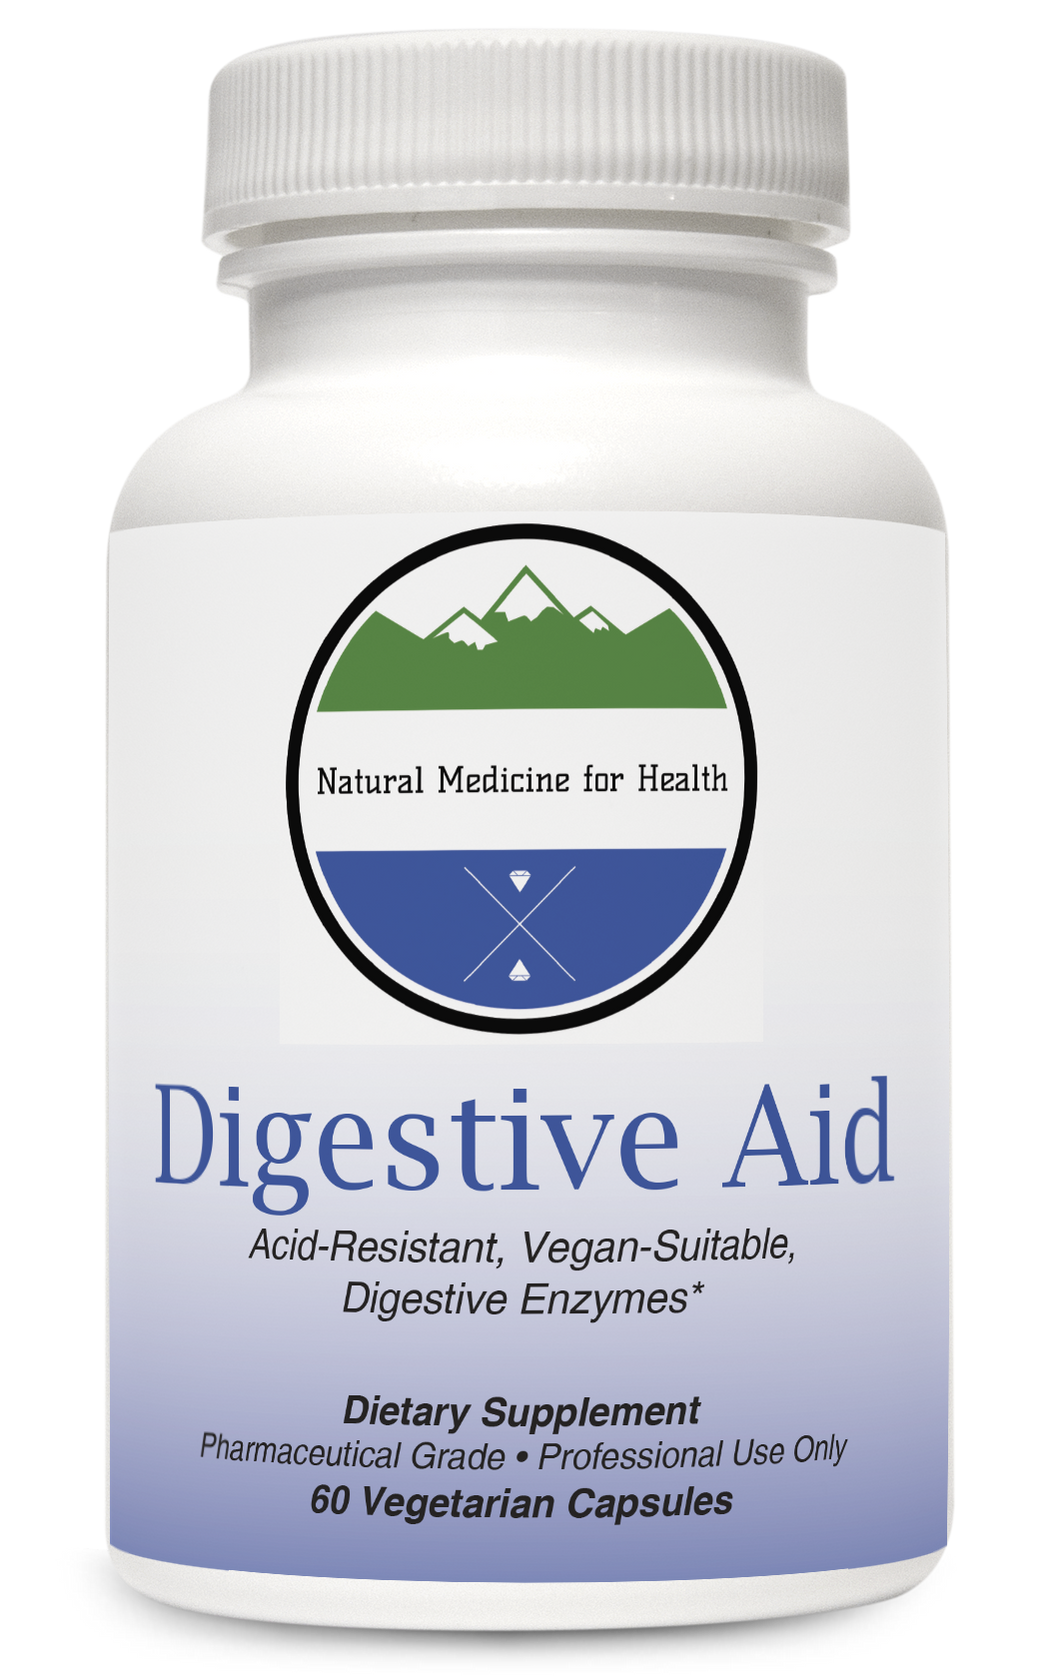 Natural Medicine for Health, Digestive Aid 60 Capsules